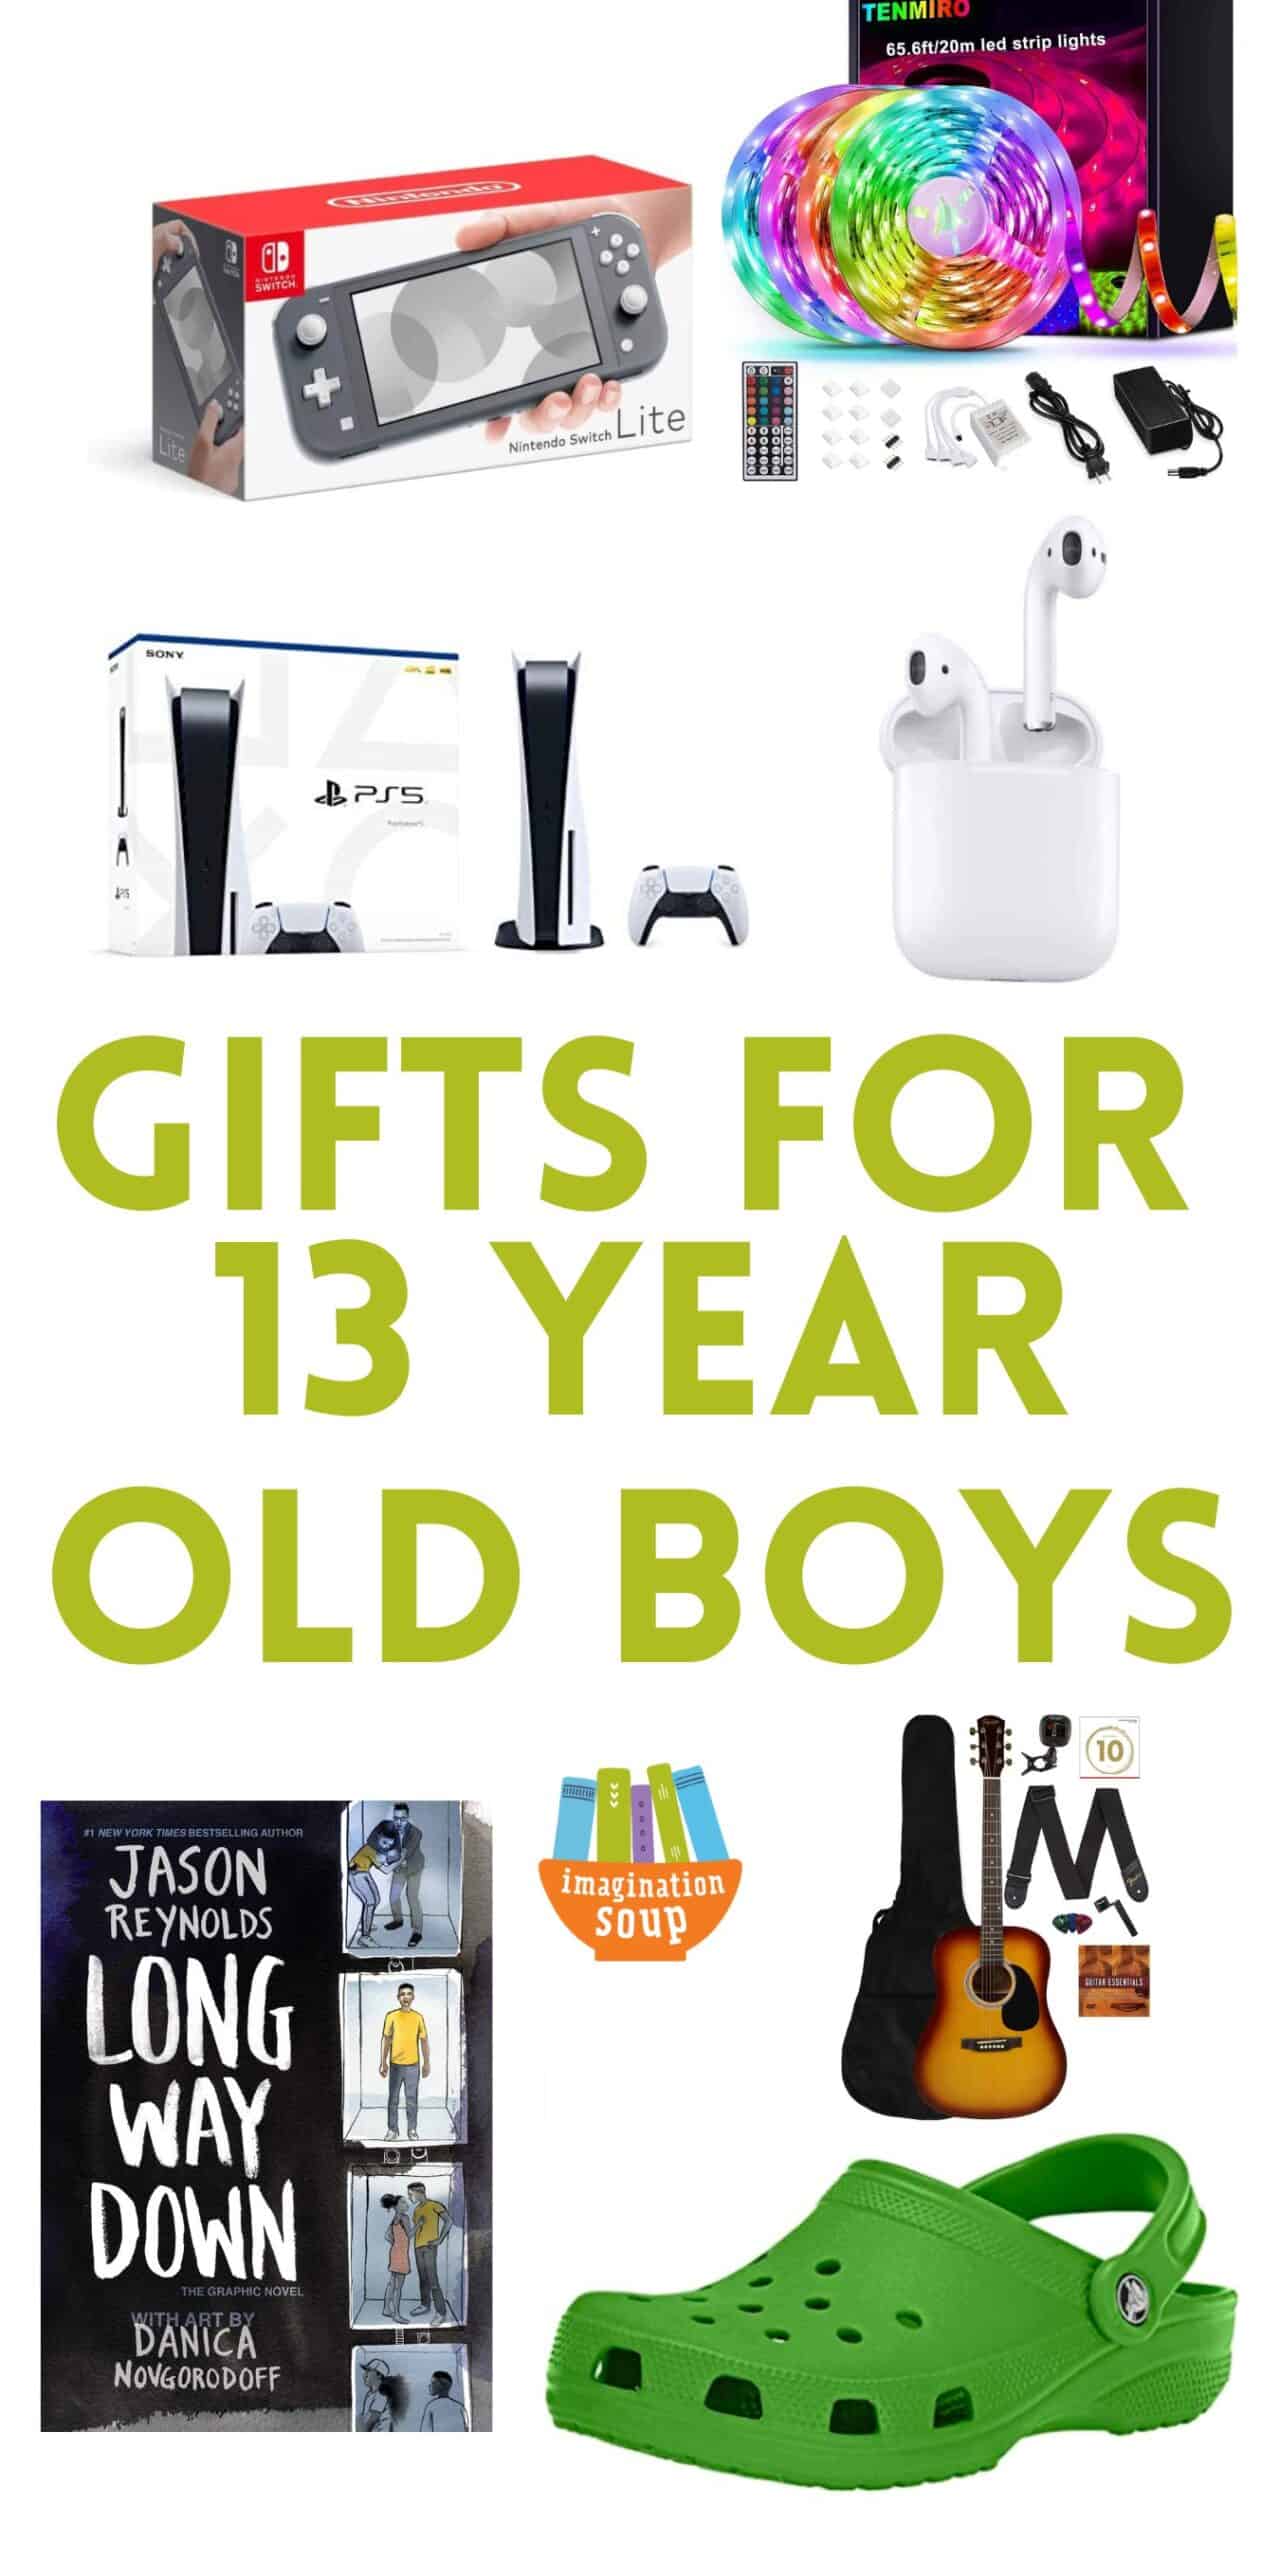 GIFTS FOR 13 YEAR OLD BOYS